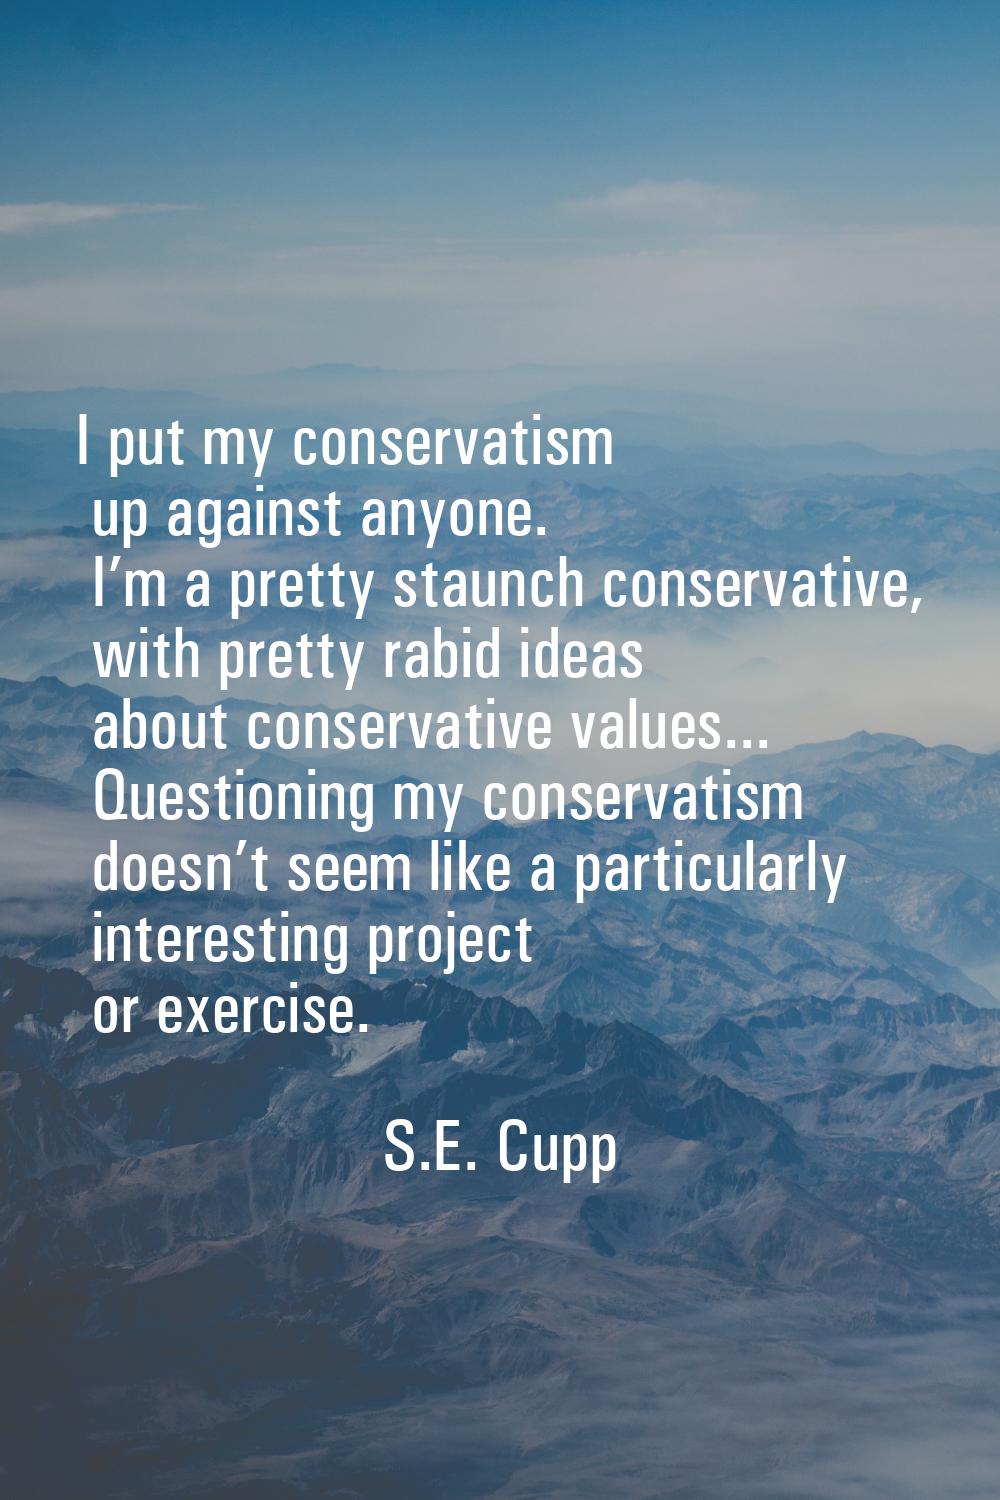 I put my conservatism up against anyone. I’m a pretty staunch conservative, with pretty rabid ideas